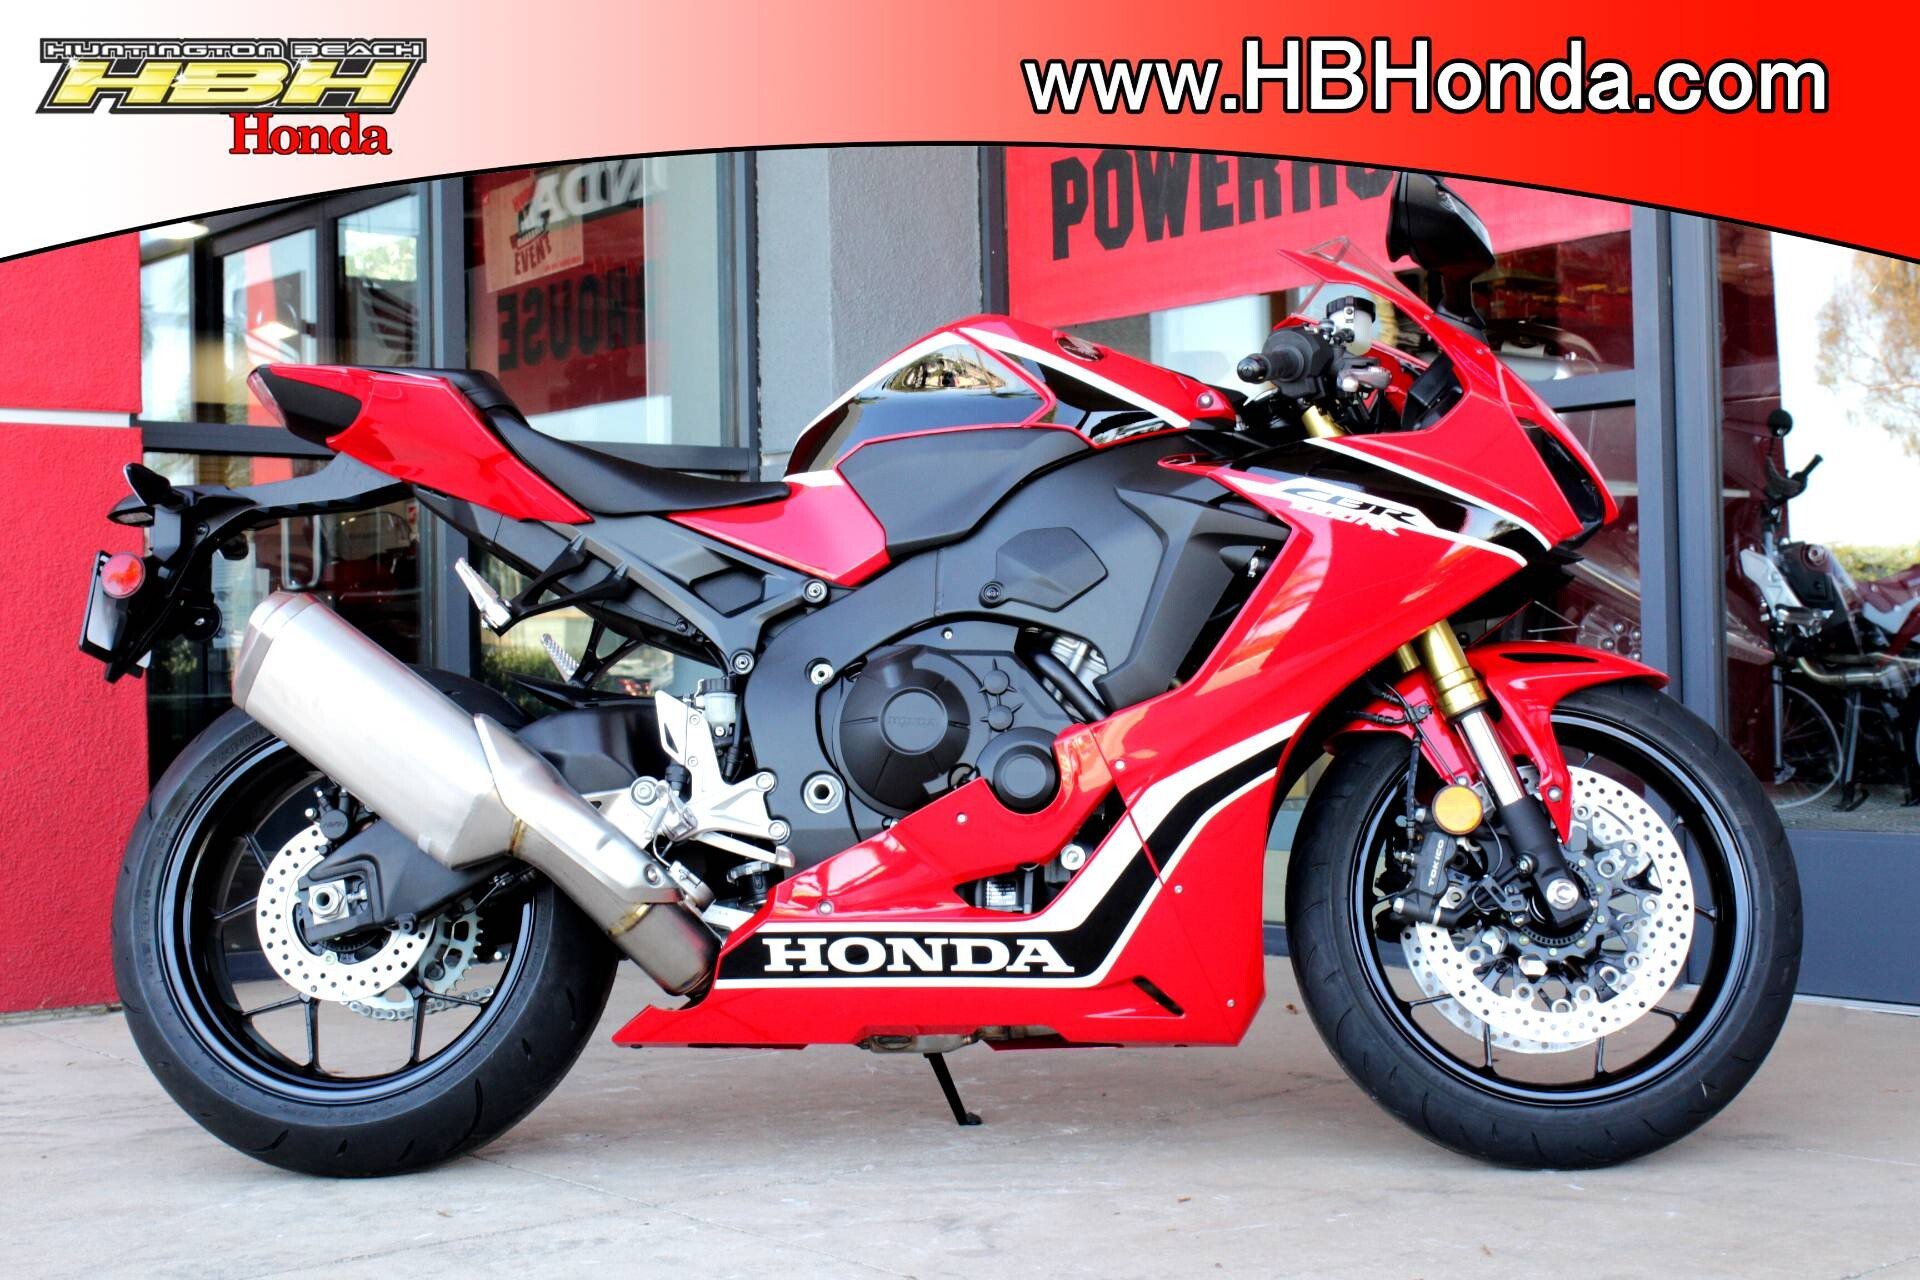 Honda Cbr1000rr Motorcycles For Sale Motorcycles On Autotrader